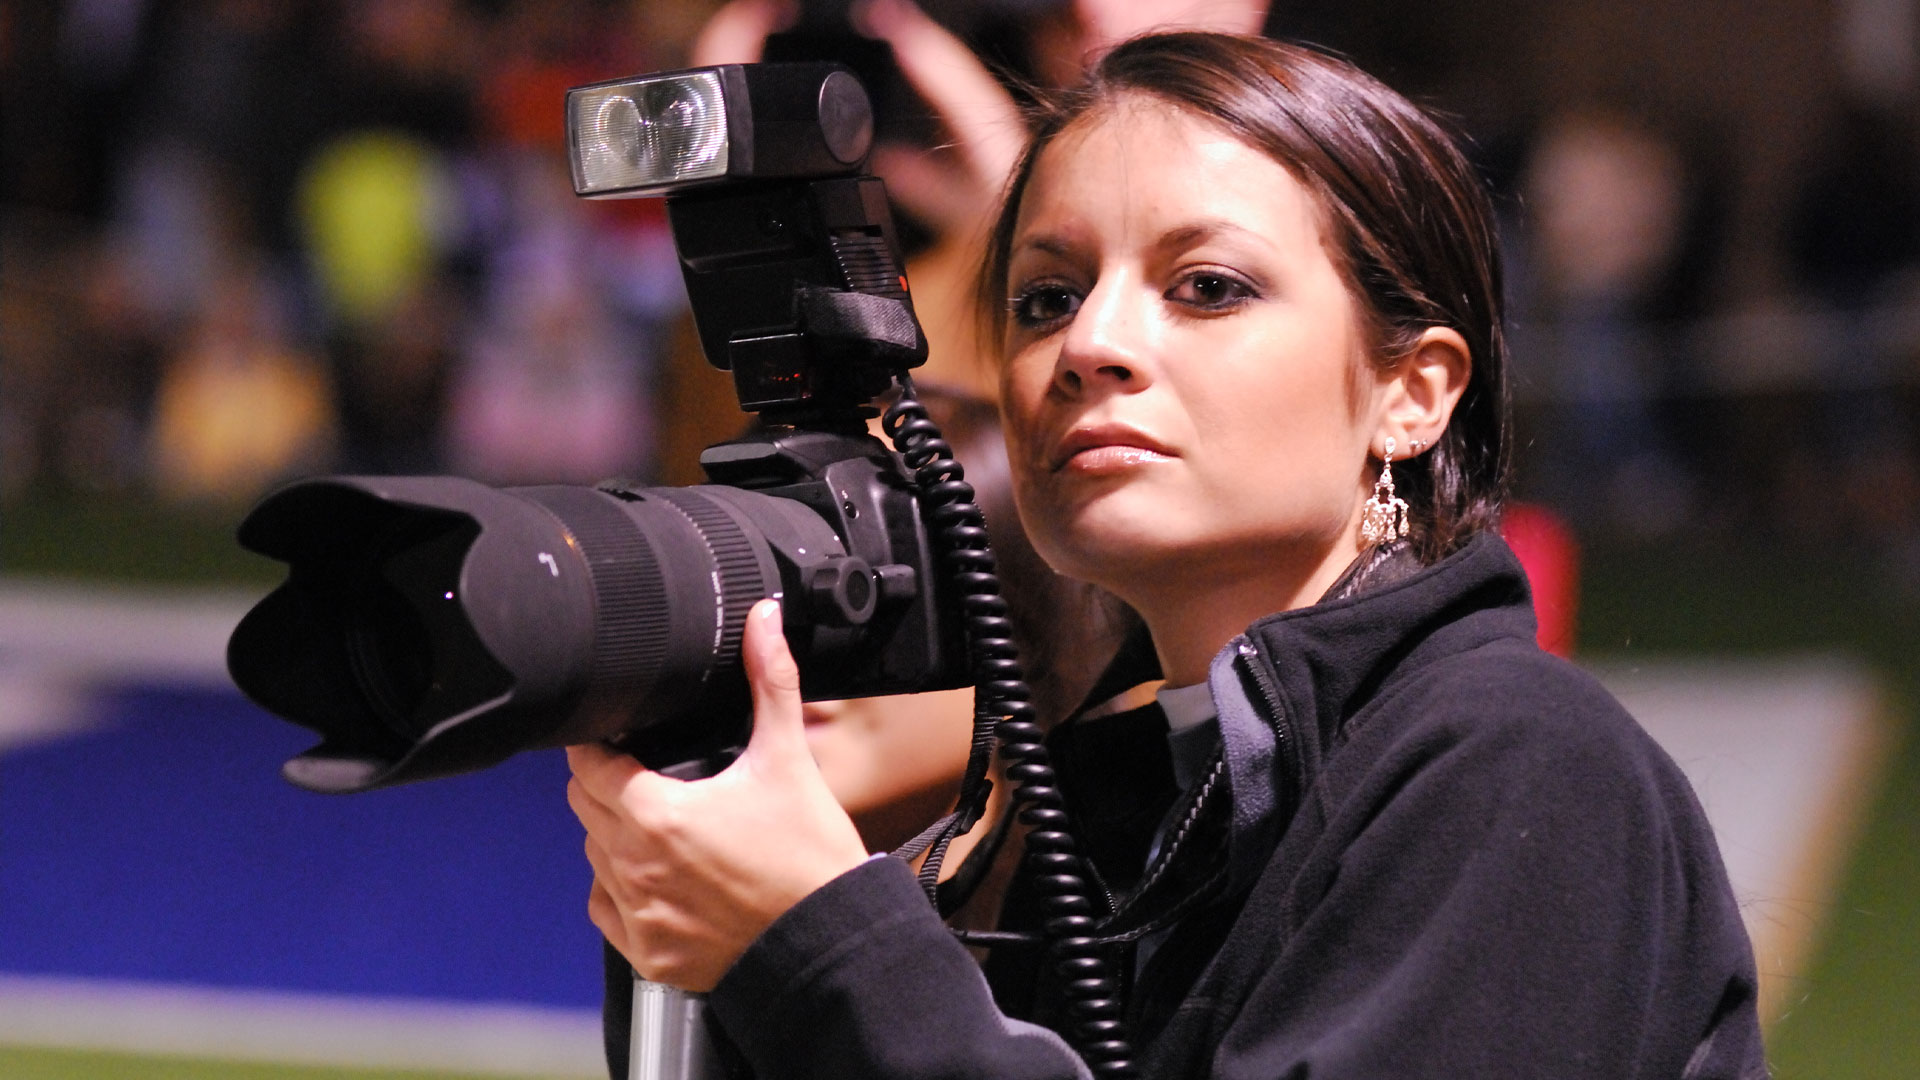 Sports photographer working at a big match.